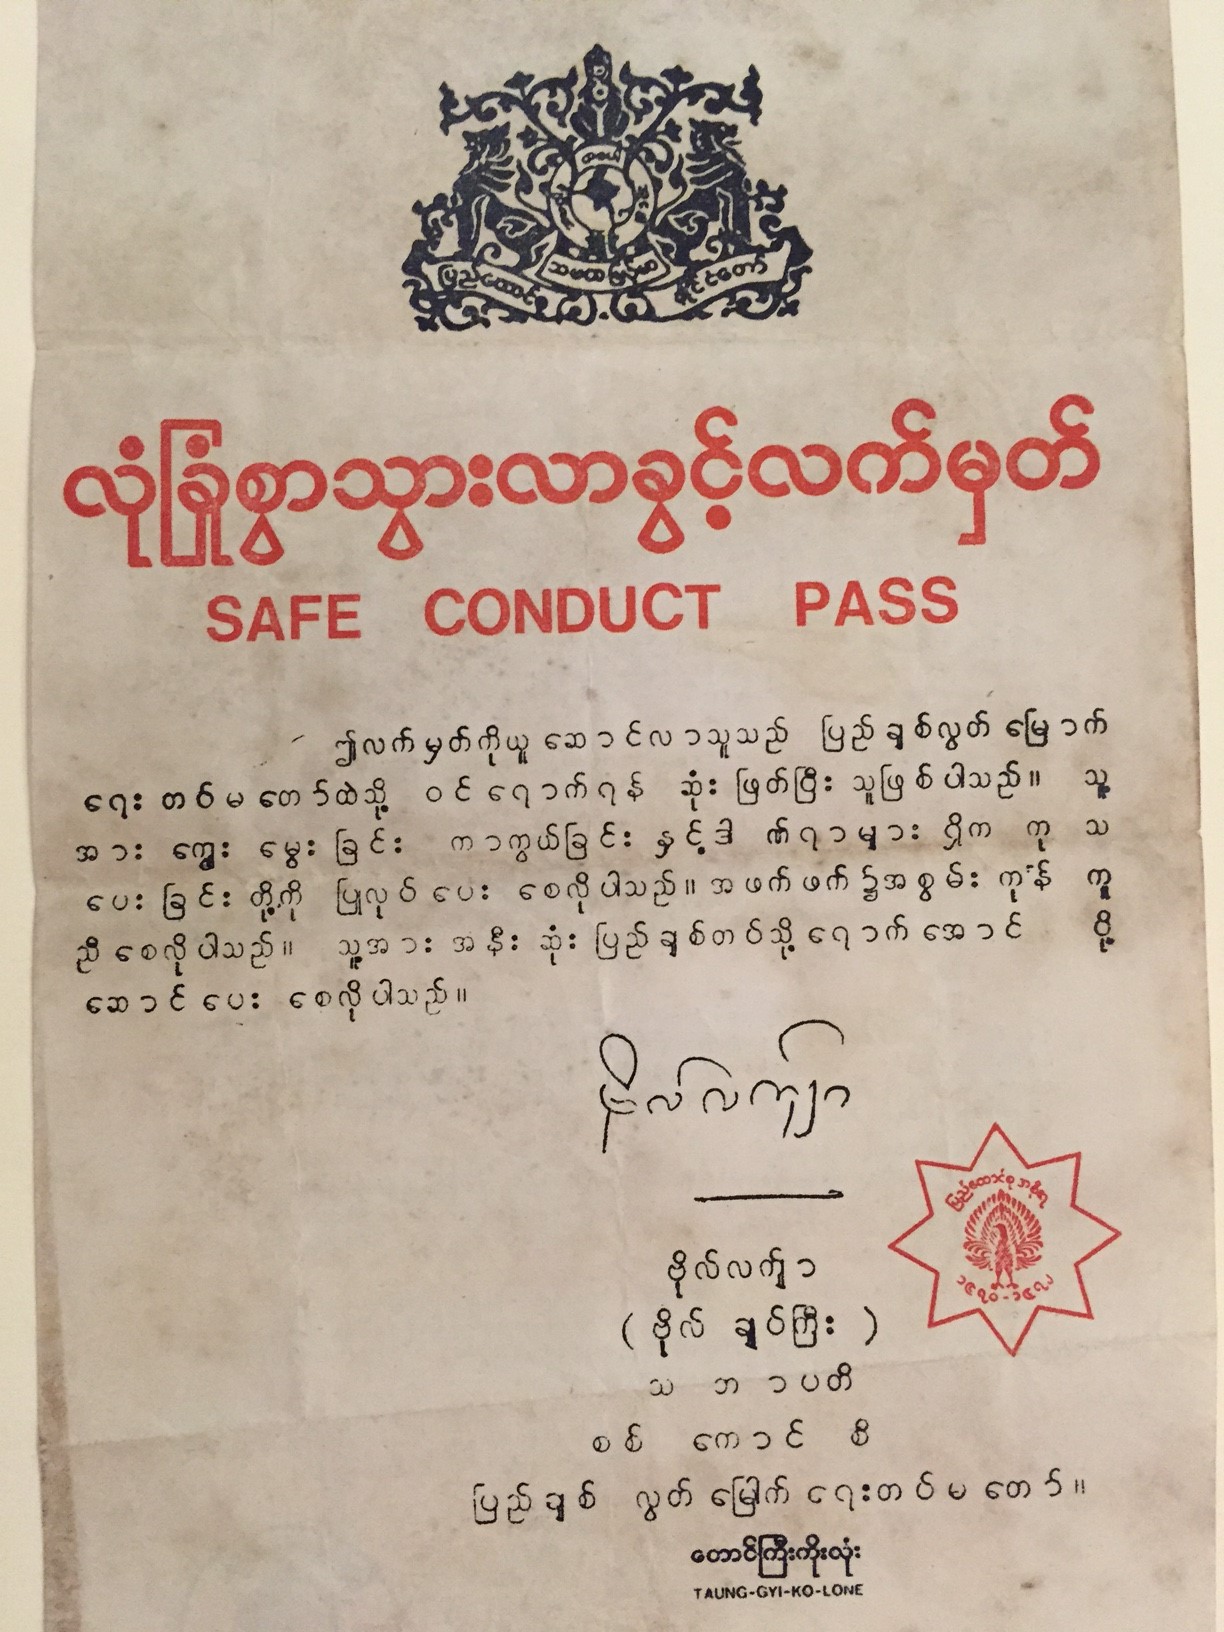 A safe conduct pass issued in the early 1970s by the Parliamentary Democratic Party, a group led by U Nu, who had also led an armed resistance group on the Thai-Burmese border against the military rule of General Ne Win. (Burmese Subject Collection, Hoove